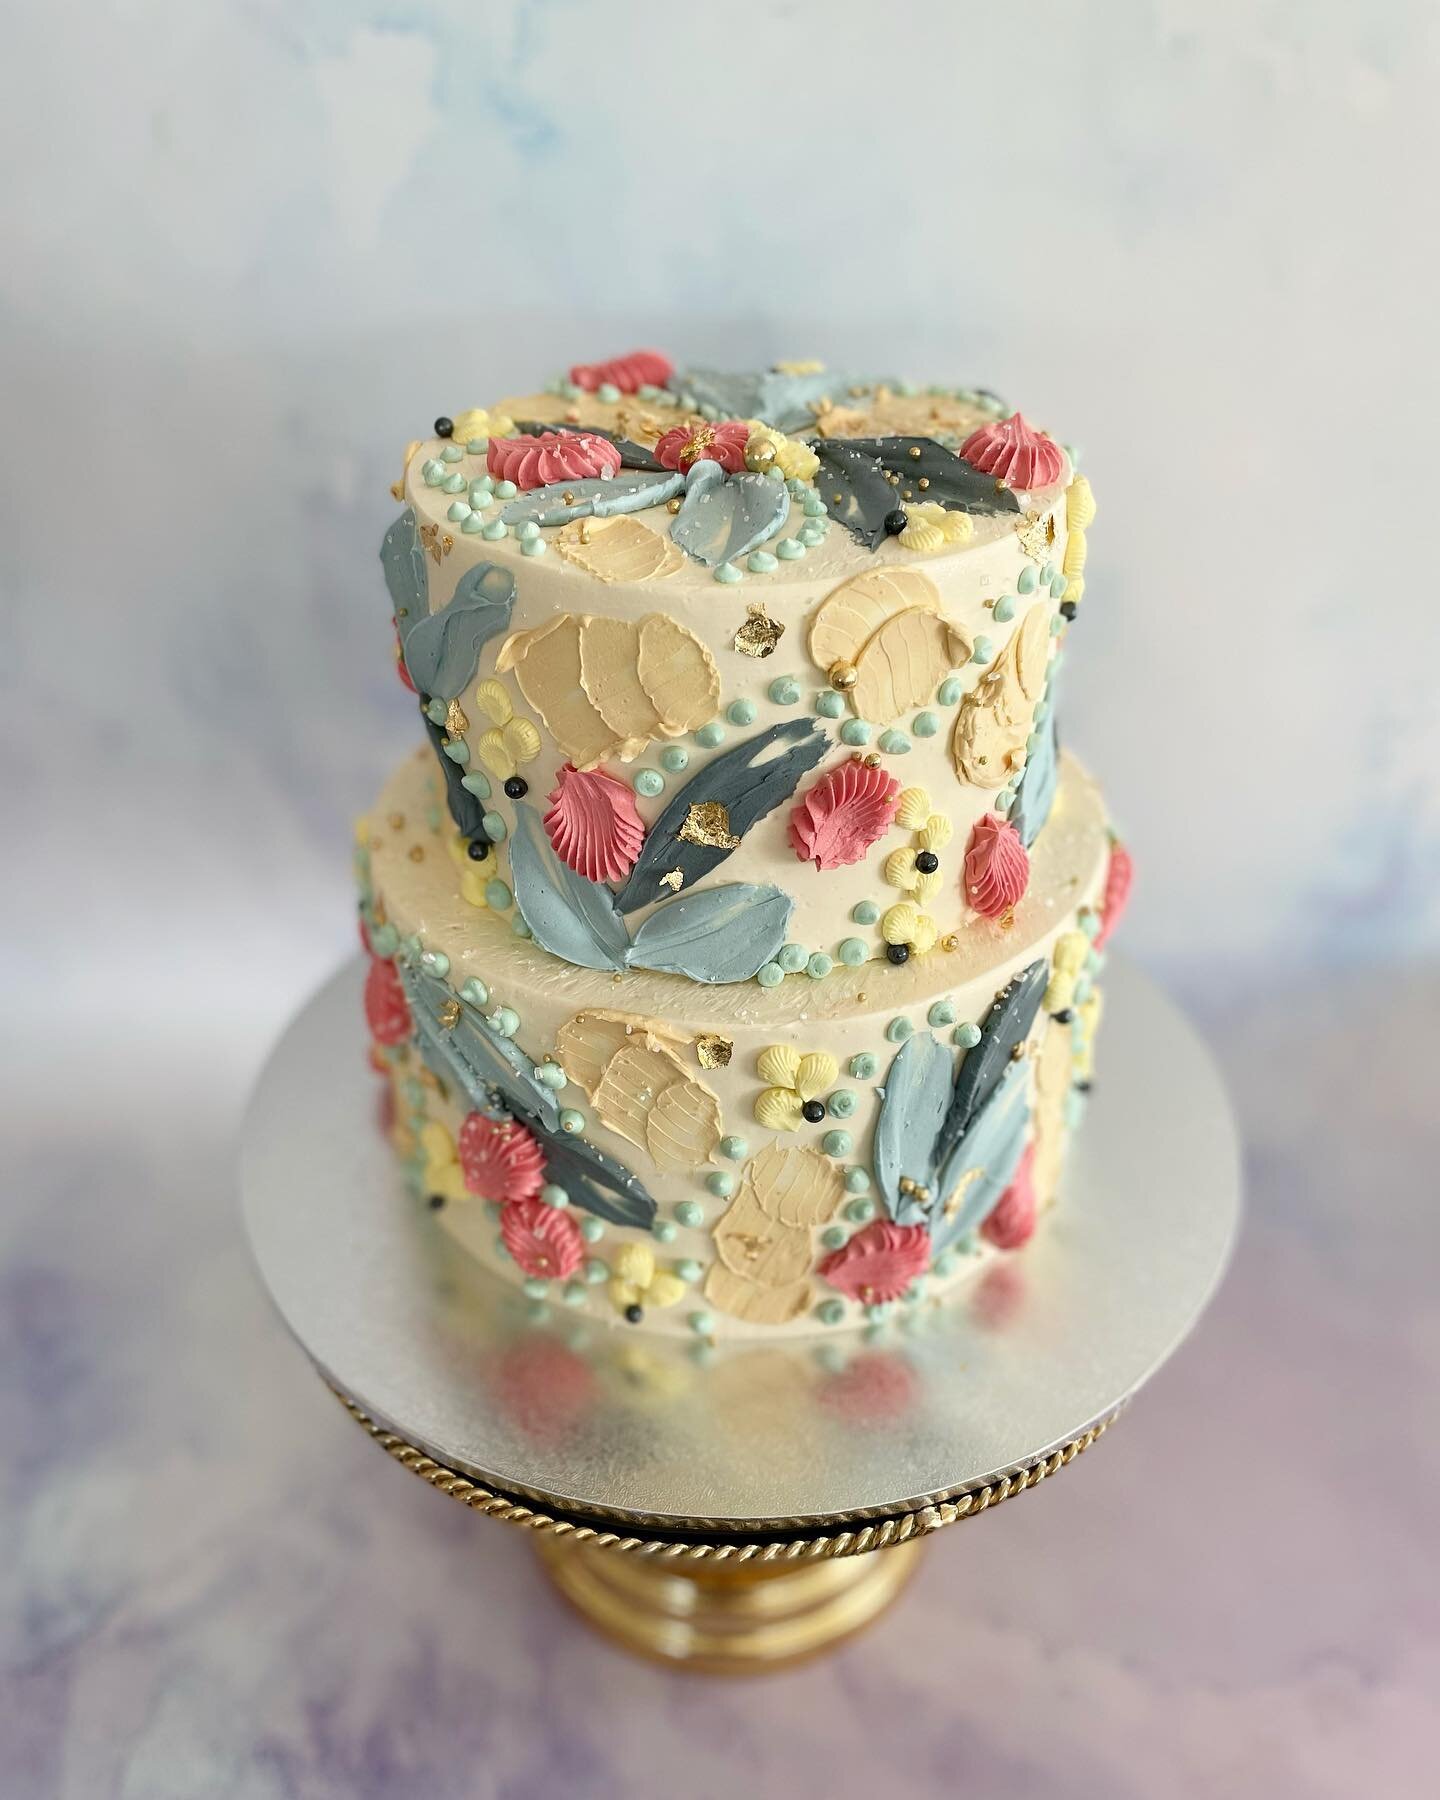 Here&rsquo;s a still of Jill&rsquo;s cake on the weekend. I love how the colours compliment the textures on this design. #poshlittlecakes #perthcake #perthcakes #cakesofperth #perthcakedesigner #buttercreamcake #cakesperth #perthcakemaker #cakesofins